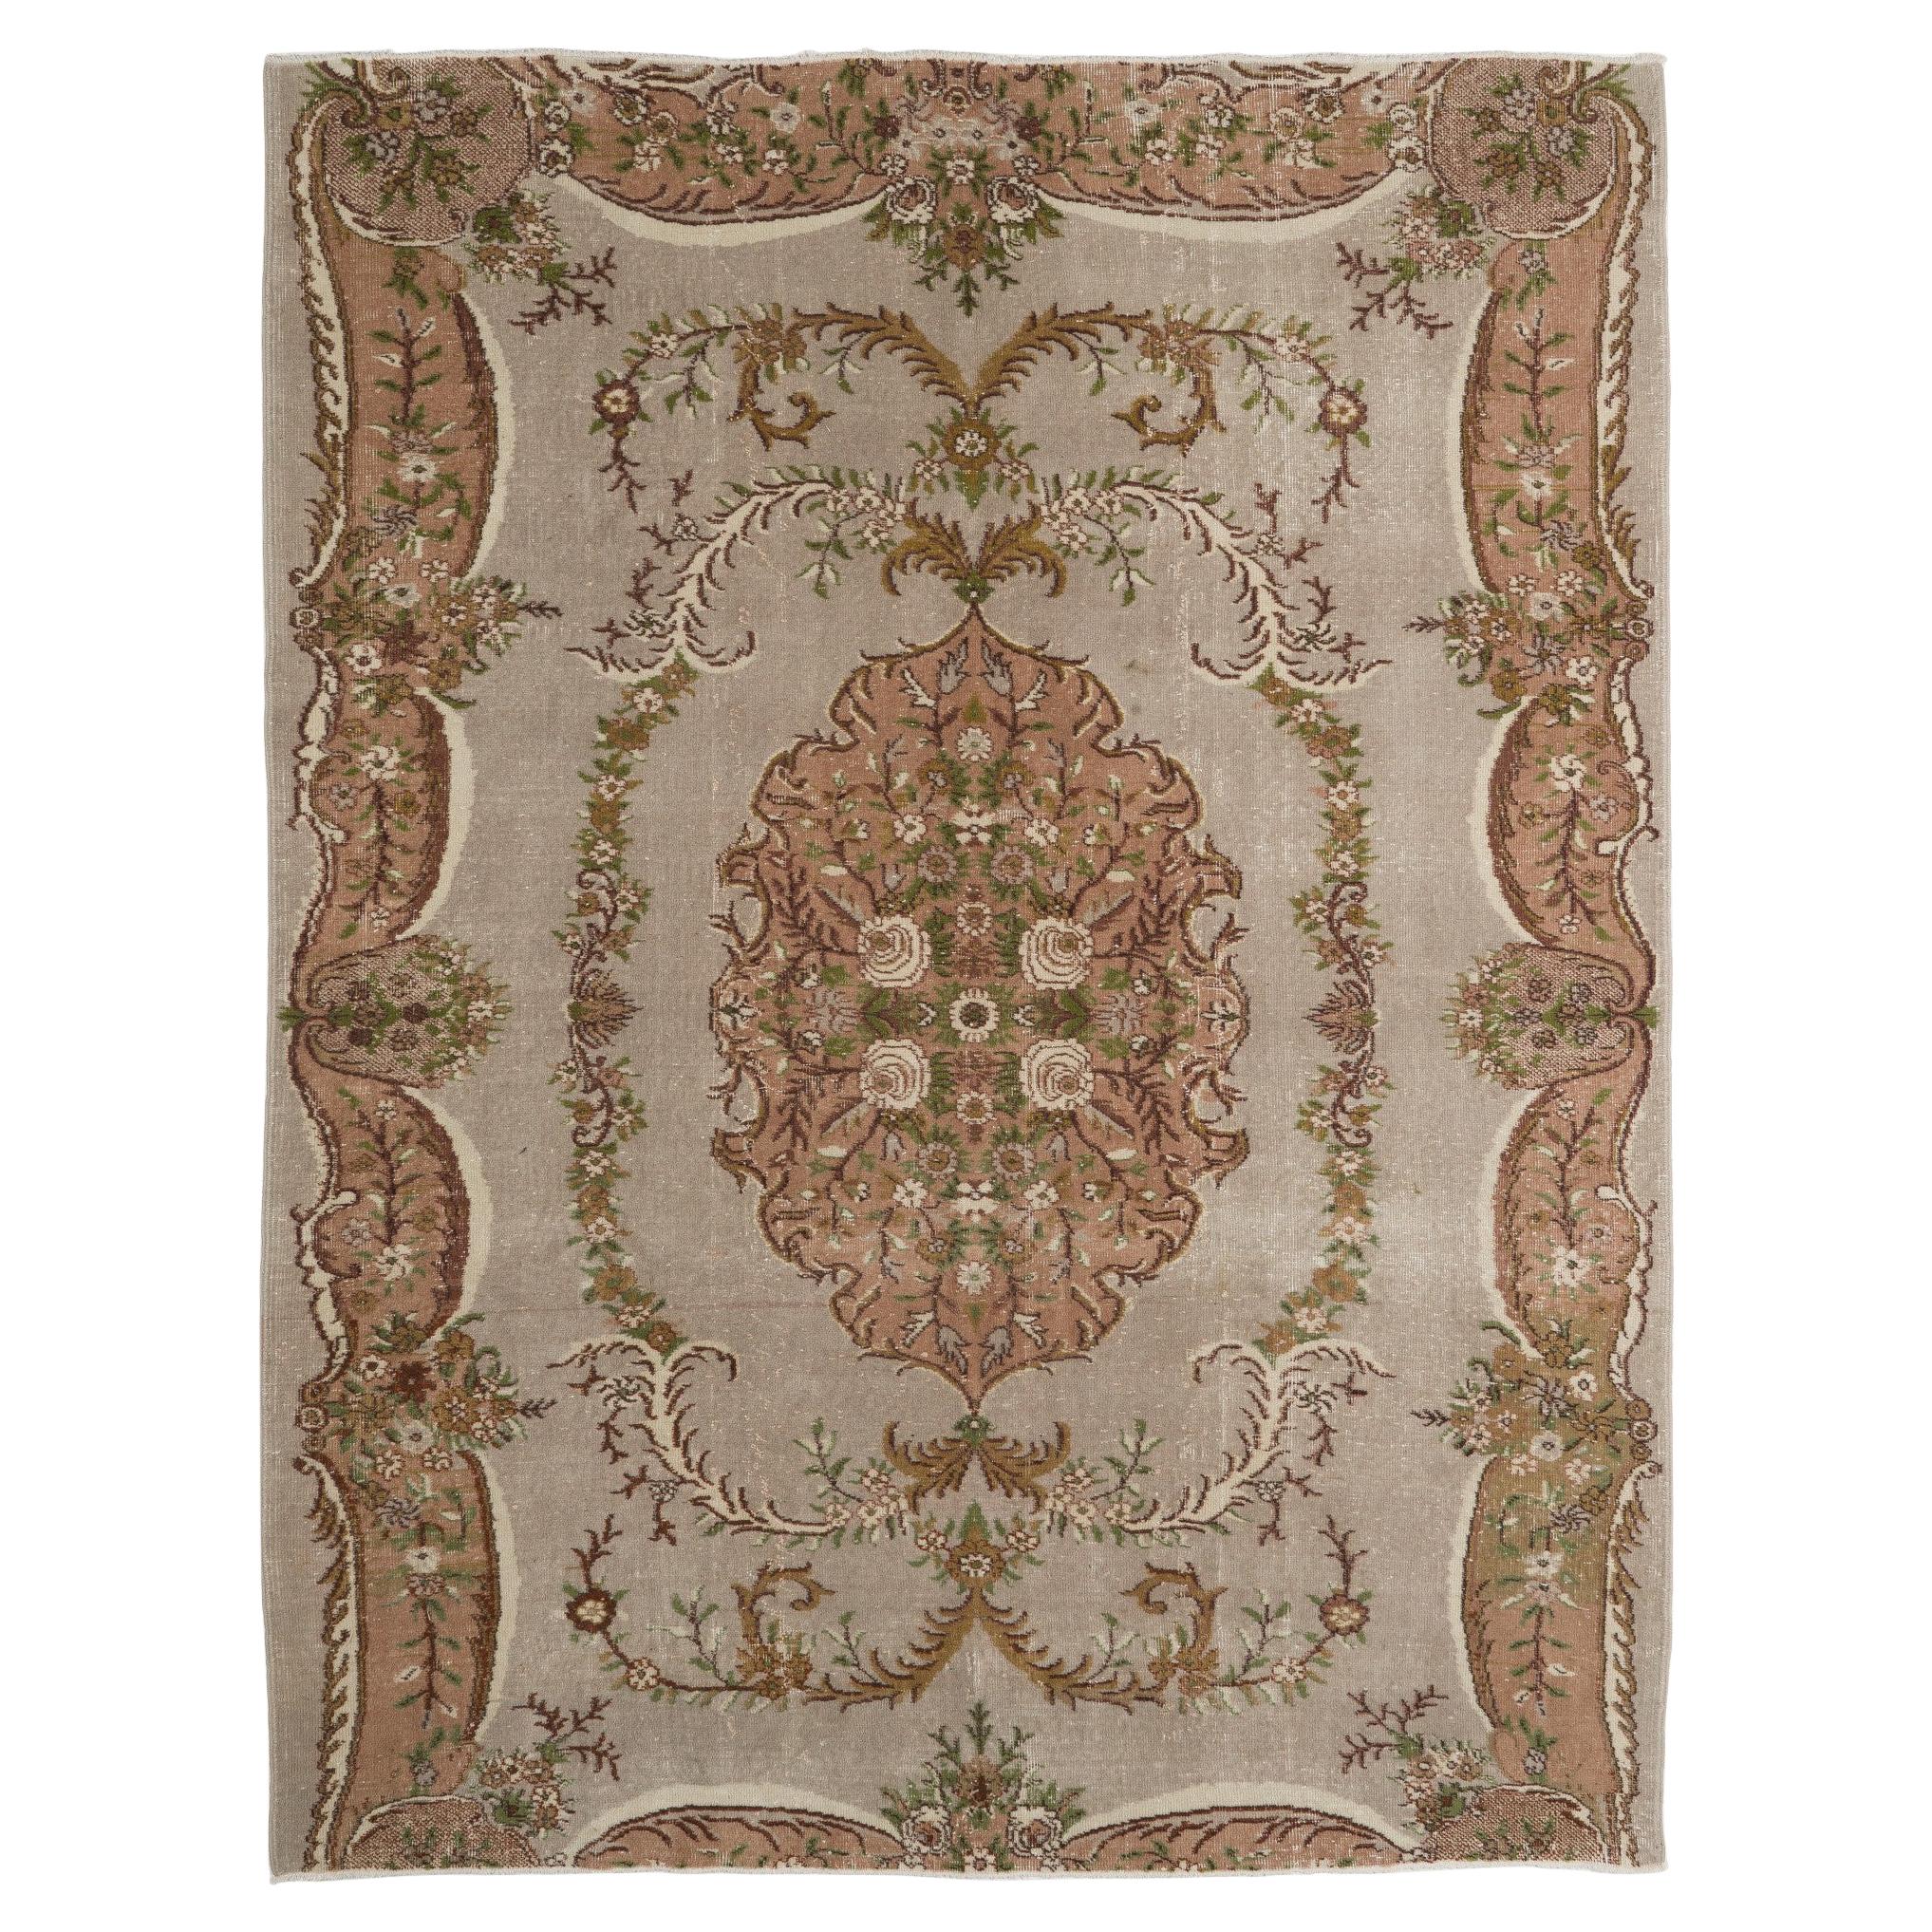 7x9 Ft Aubusson Inspired Vintage Turkish Handmade Wool Rug in Faded Rose, Gray